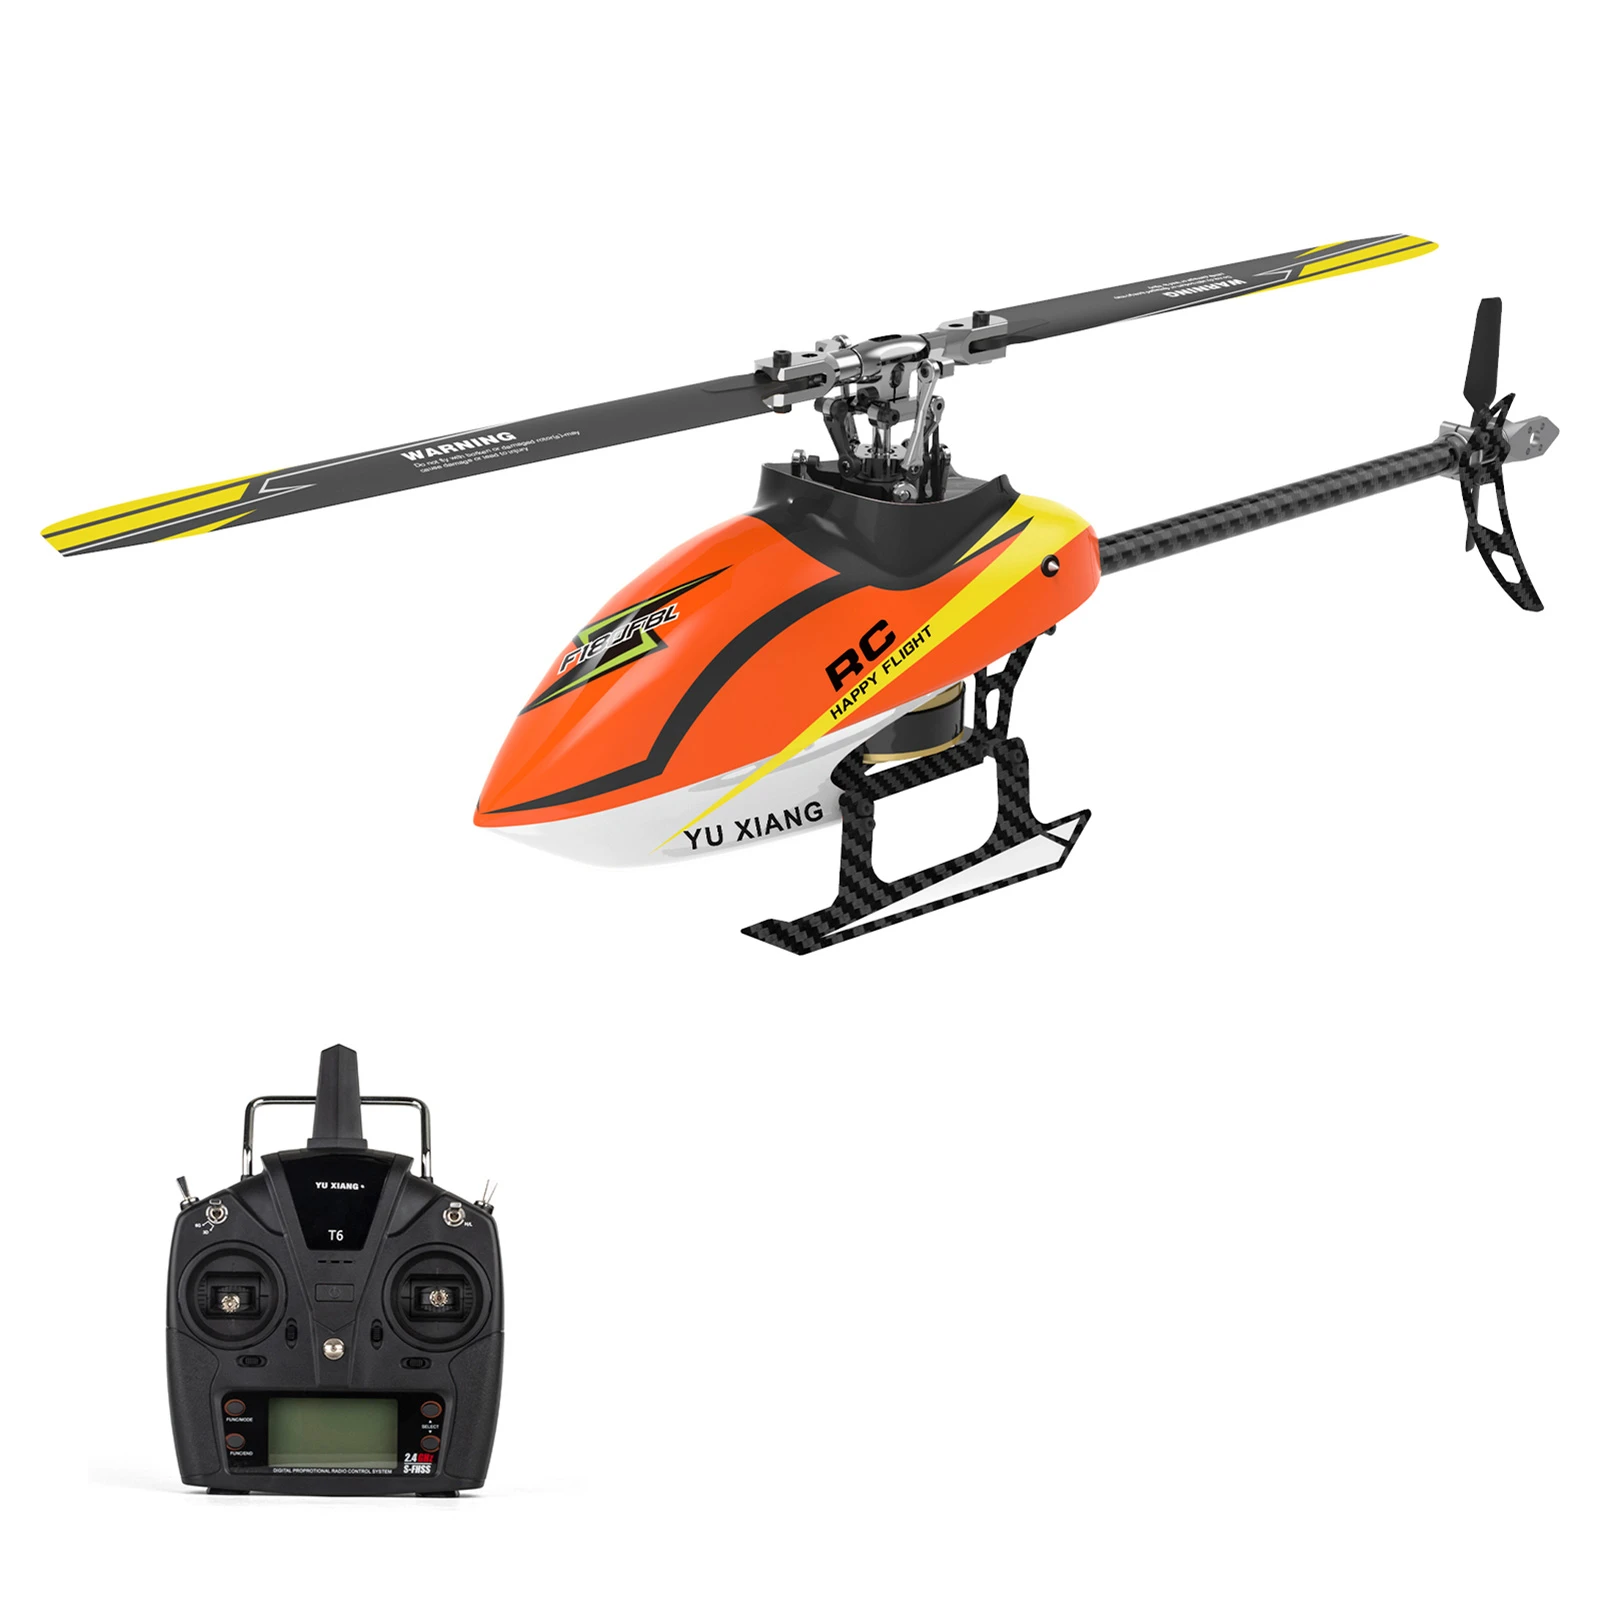 YU XIANG F180 RC Helicopter 2.4GHz 6CH 3D/6G Stunt Helicopter RTF Dual Motor RC Gift for Adults|RC Helicopters| - AliExpress